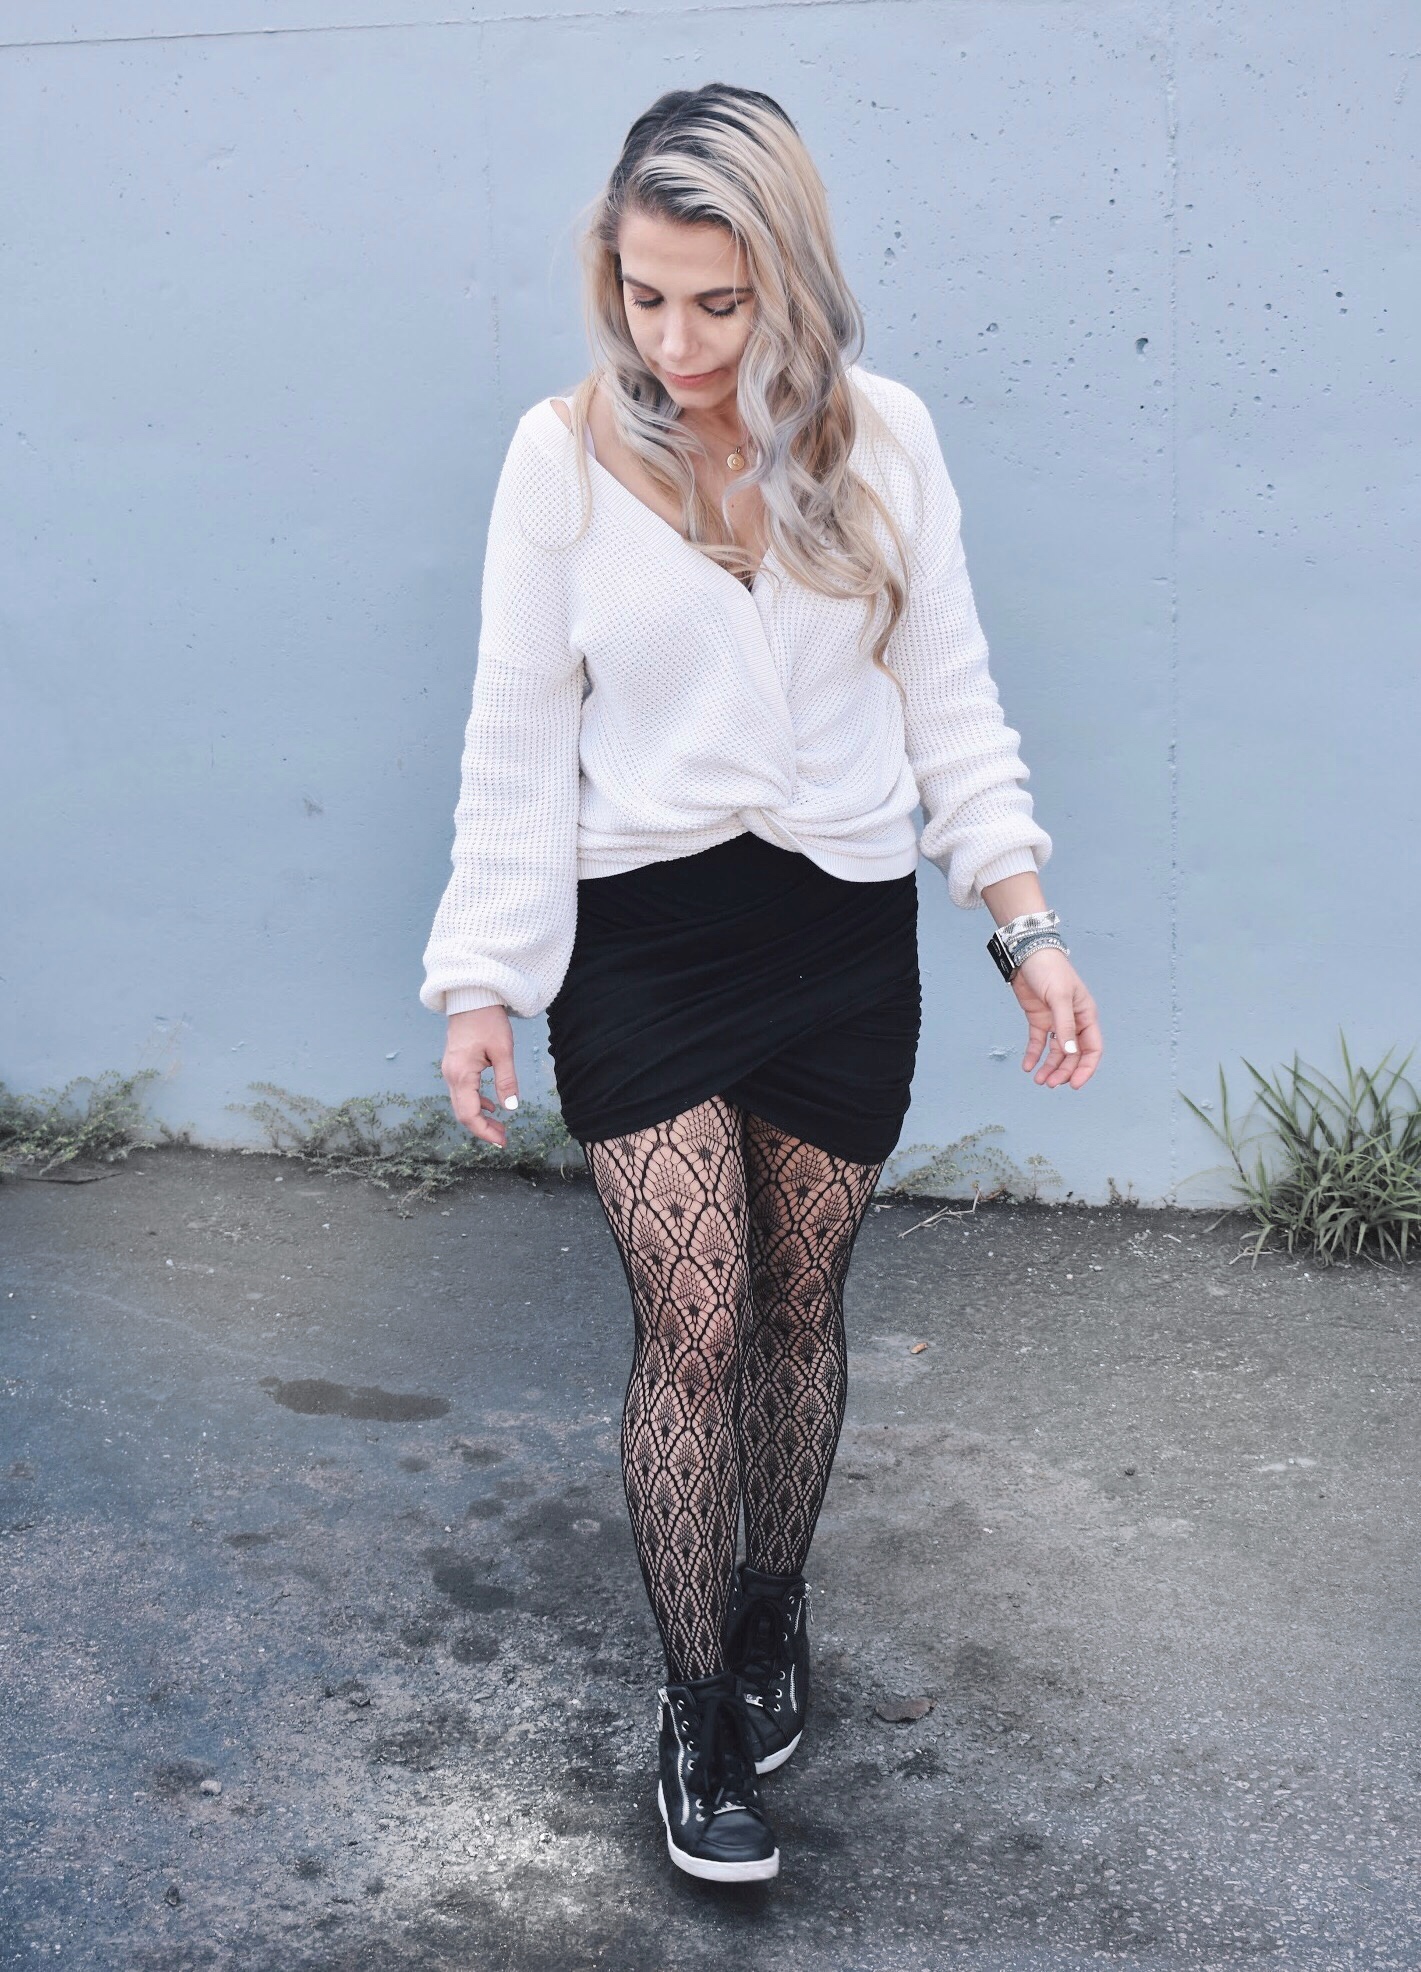 Fishnet Tights Outfit Ideas - Fall Street Style 2018 - Fashion blogger fishnet tights outfit showing how to use fishnet tights to transition your wardrobe to fall. Fishnet tights and mini skirt outfit helps you with how to wear a mini skirt in fall. Plus, this twist-front sweater is the cutest you'll ever see! Check out this Street Style Fall 2018 inspiration! #LikeTKit #Fishnets #FishnetTights #FallFashion #WomensFashion